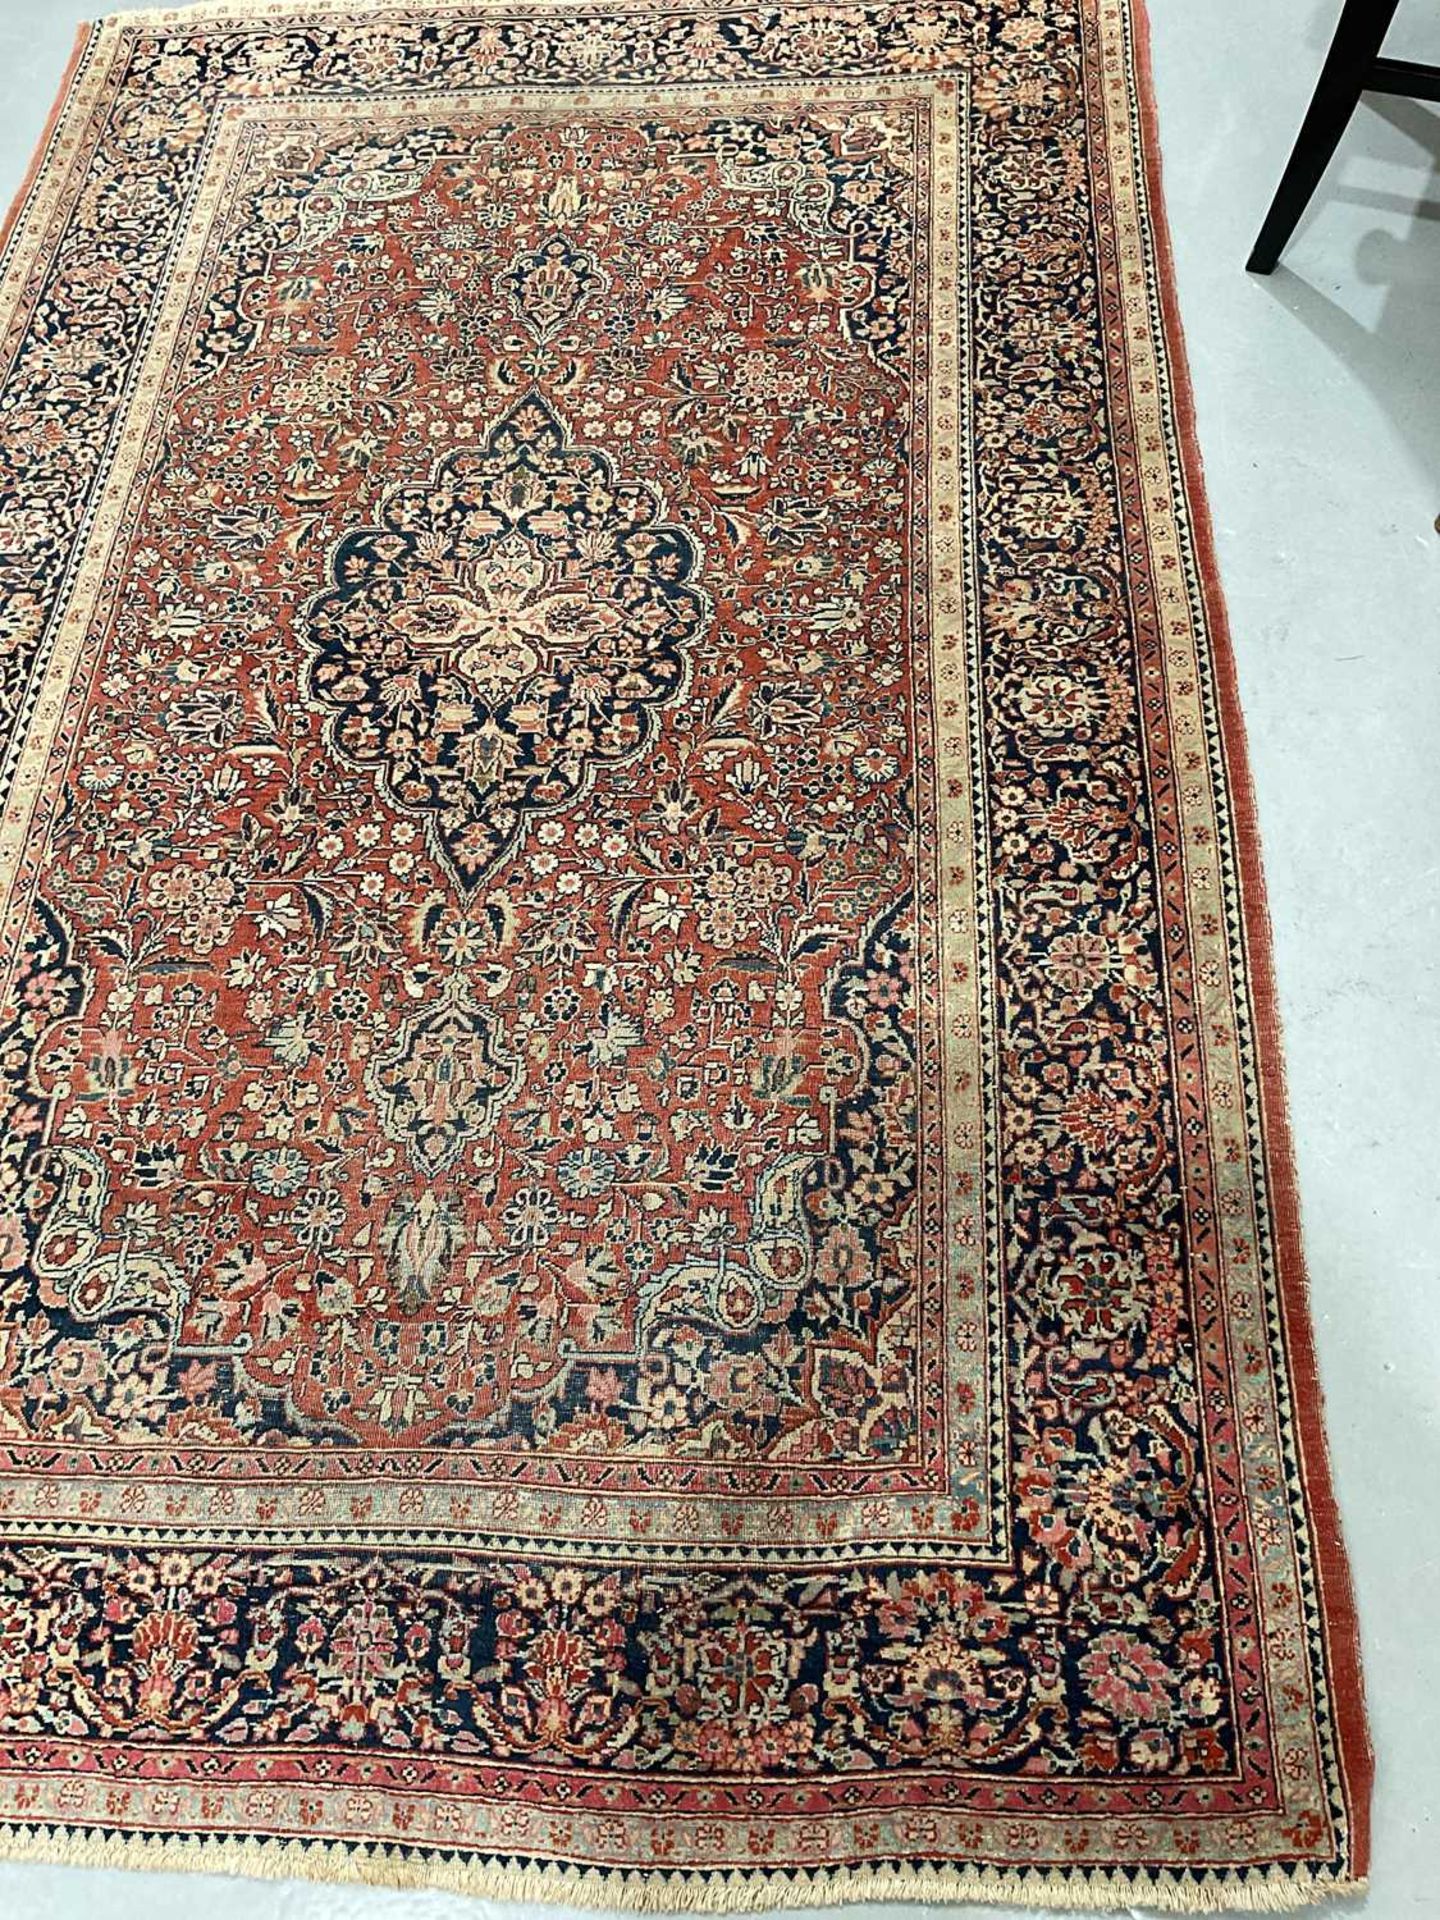 A Kashan rug with central medalion within borders, 202 x 133cm (2) Provenance: The contents of The - Image 7 of 9